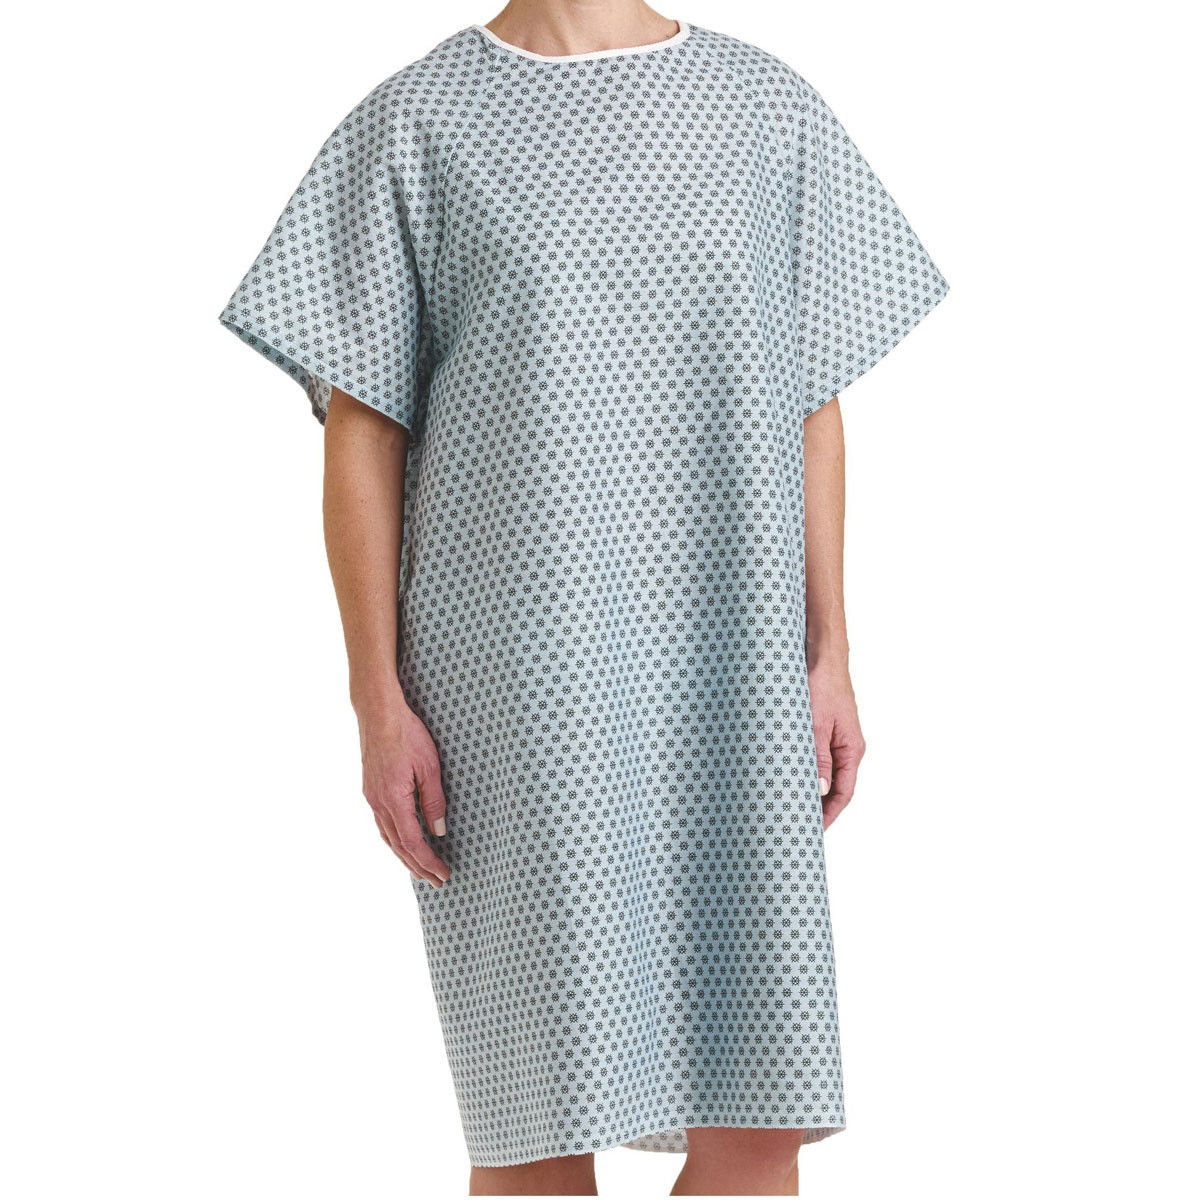 What fabric blend is in this hospital gown?